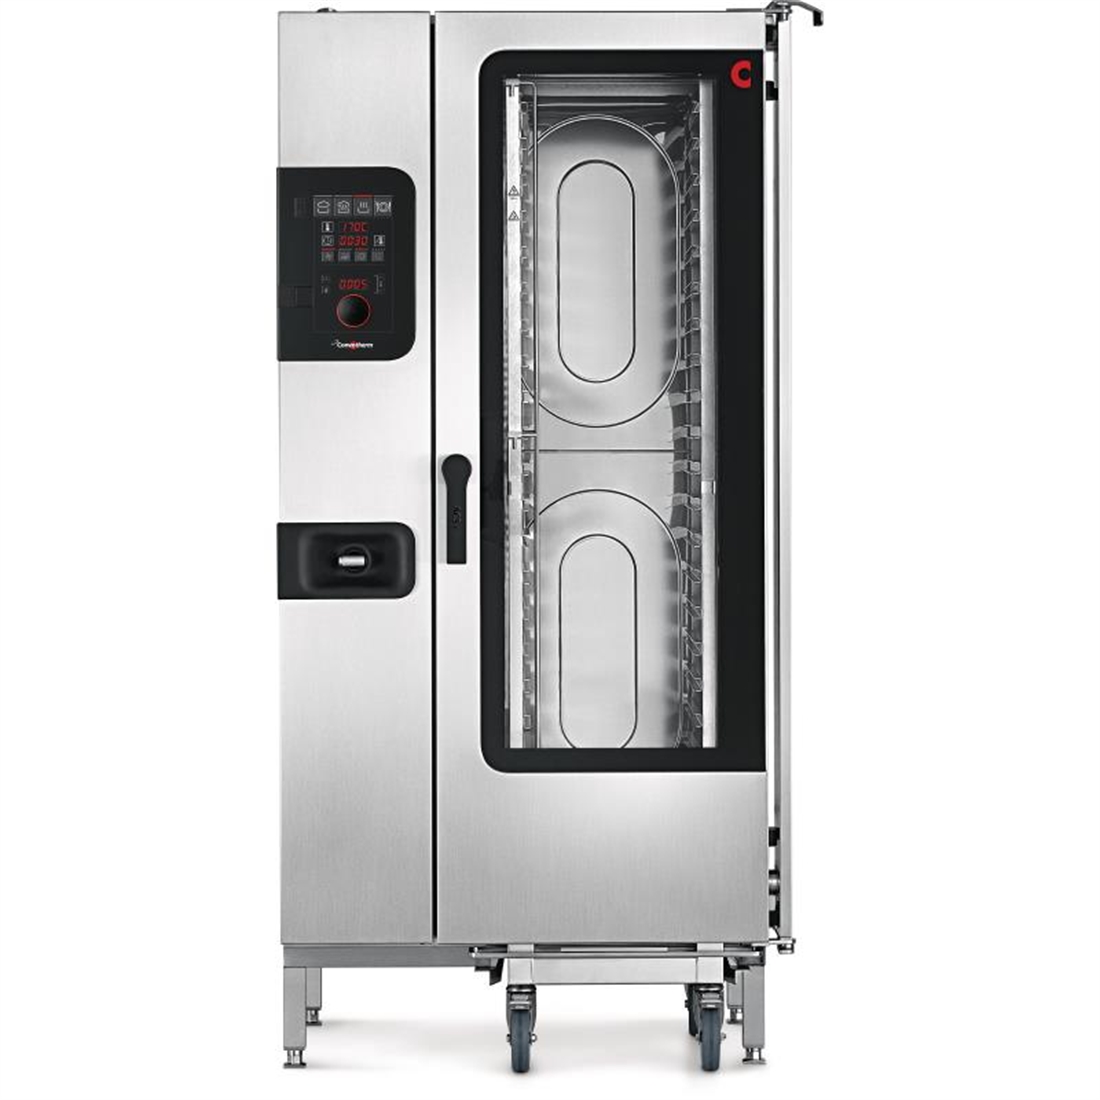 Convotherm 4 easyDial Combi Oven 20 x 1 x1 GN Grid and Install